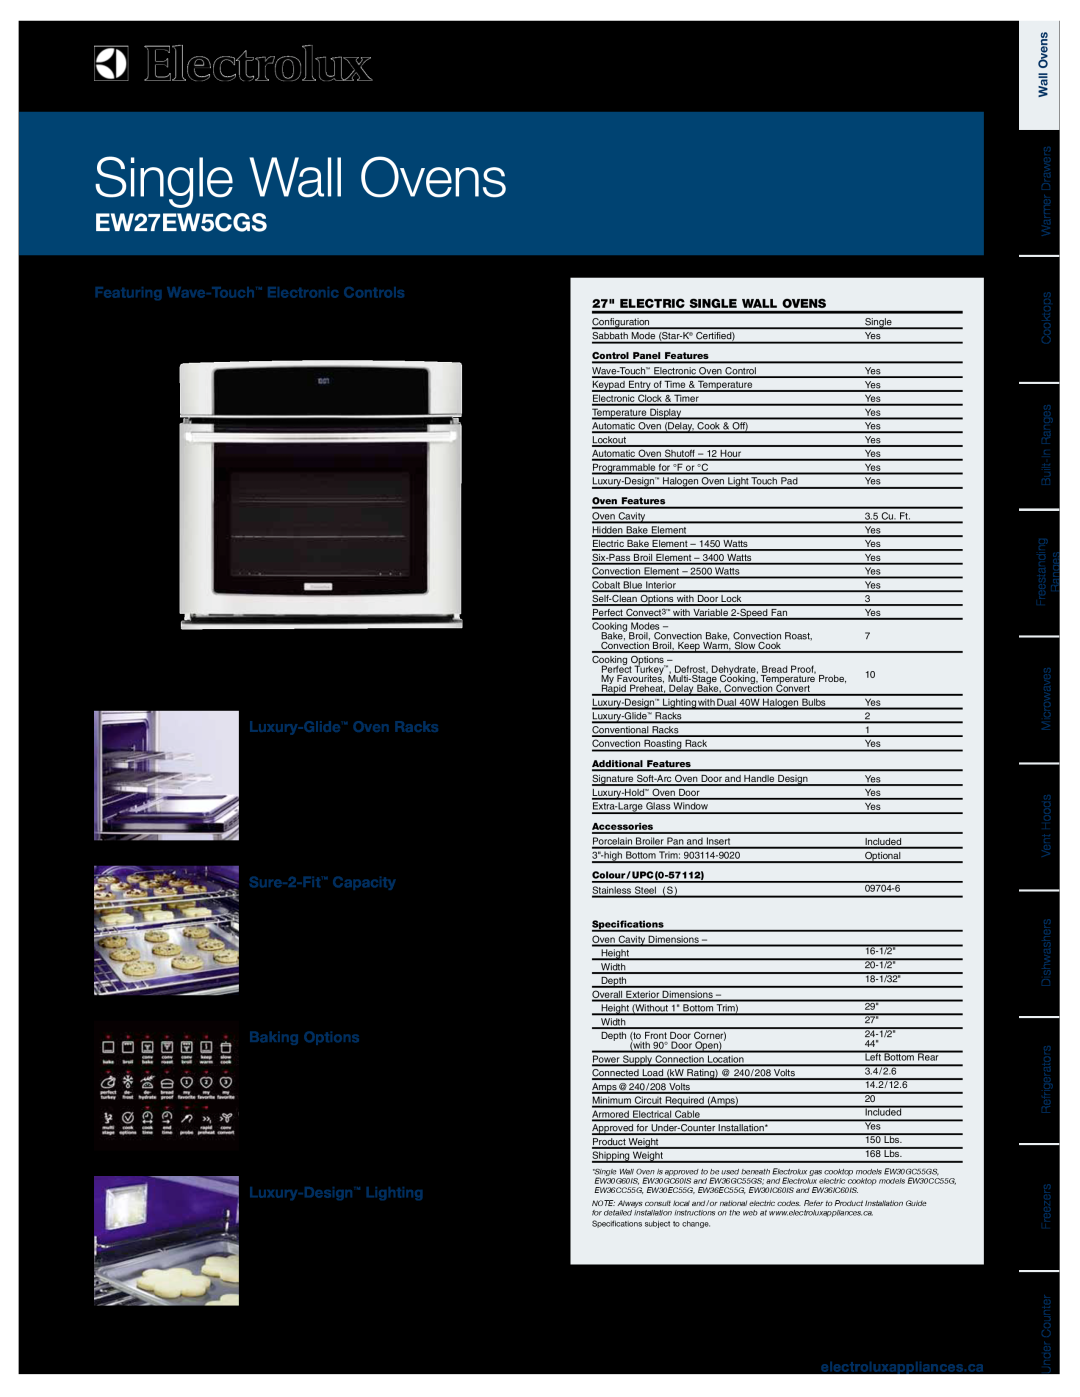 Electrolux EW27EW5CGS specifications Featuring Wave-Touch Electronic Controls Luxury-Glide Oven Racks, Sure-2-Fit Capacity 